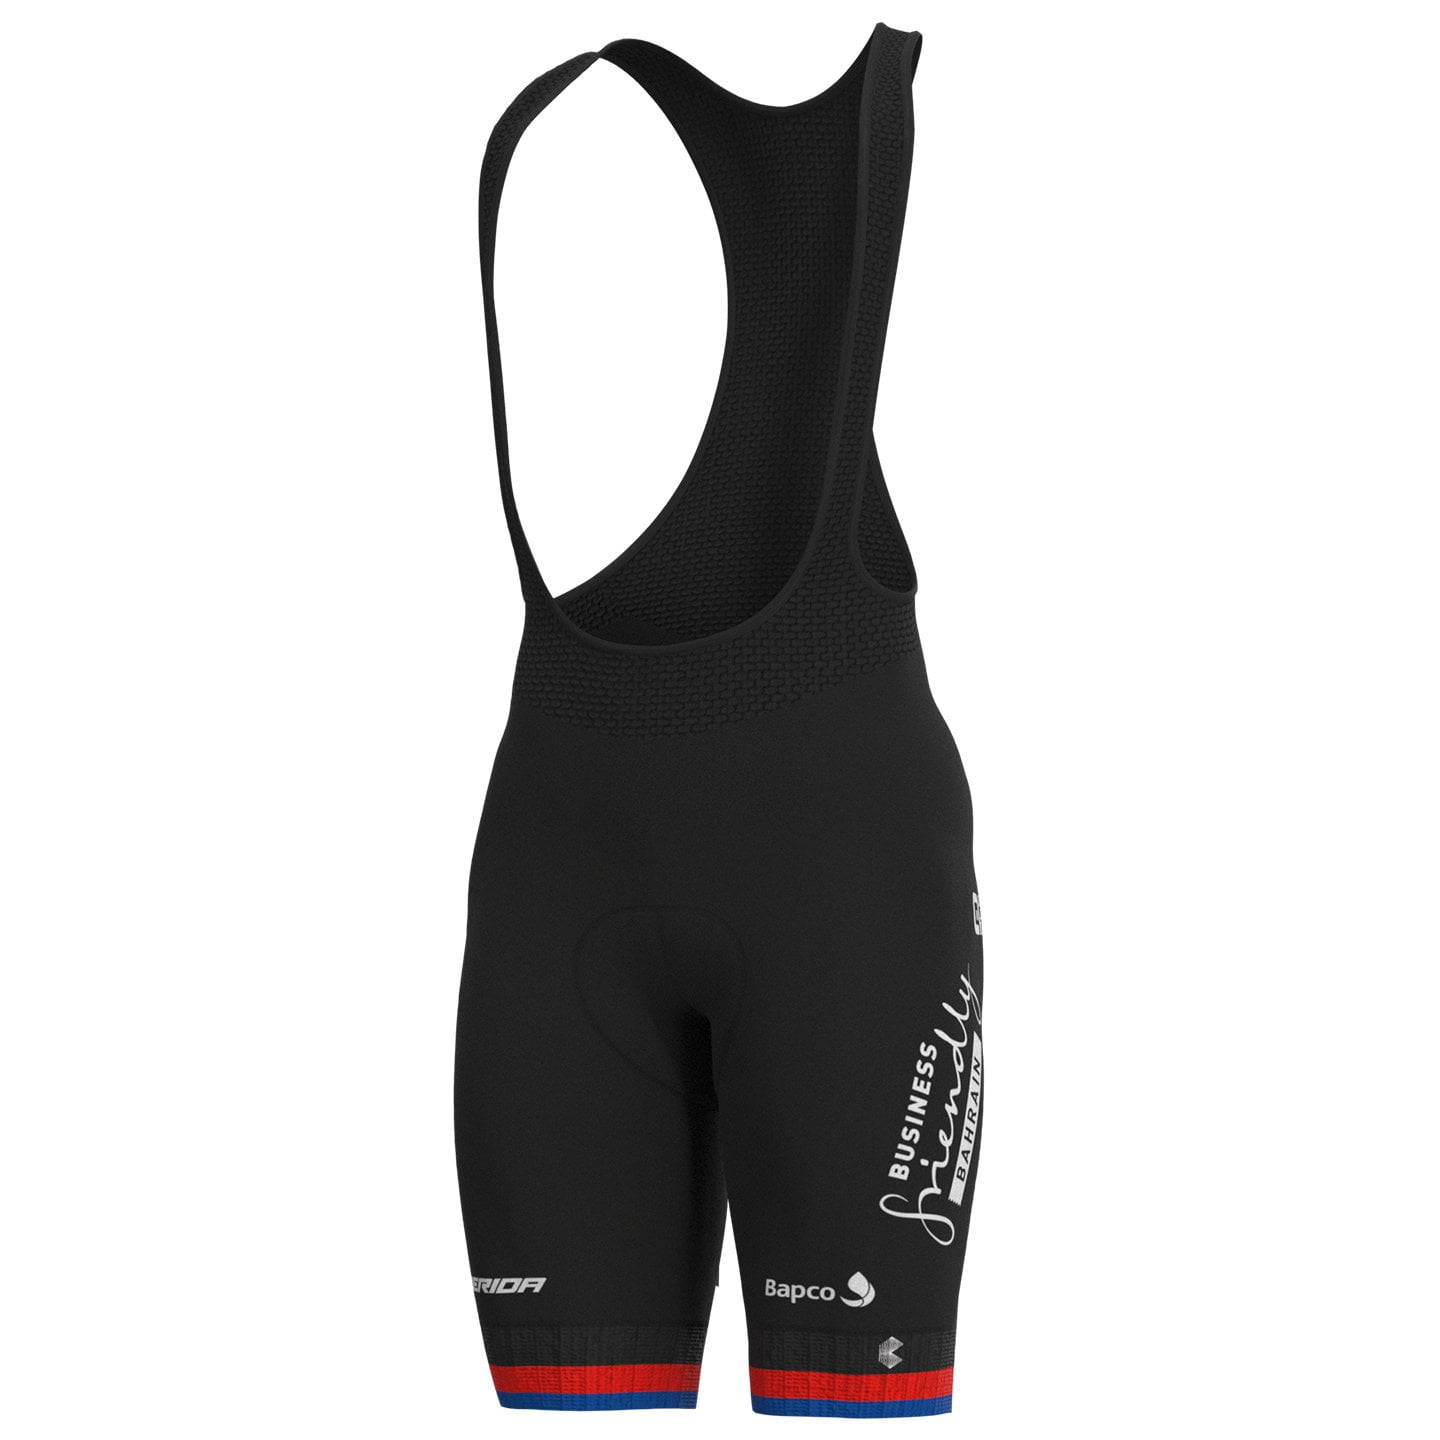 BAHRAIN - VICTORIOUS Bib Shorts Taiwanese Champion 2022, for men, size 2XL, Cycle trousers, Cycle gear